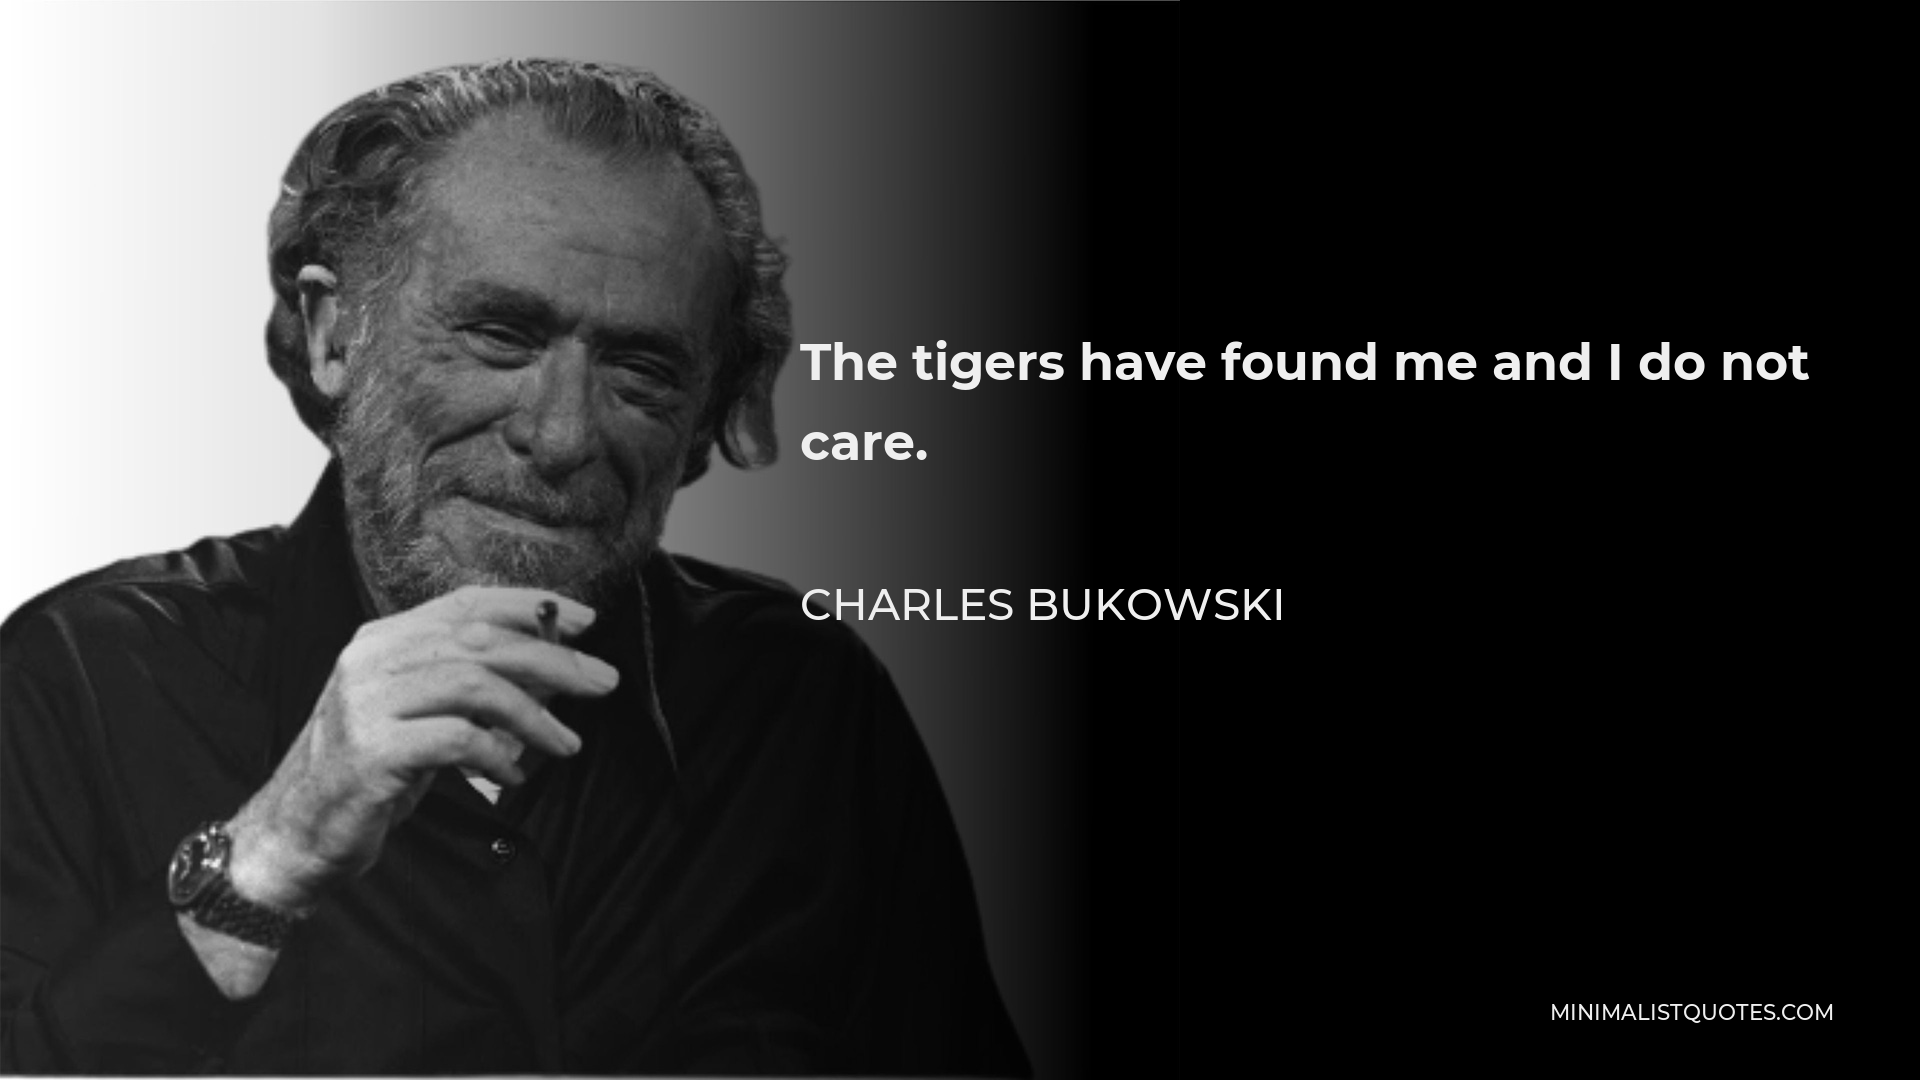 Charles Bukowski Quote - The tigers have found me and I do not care.